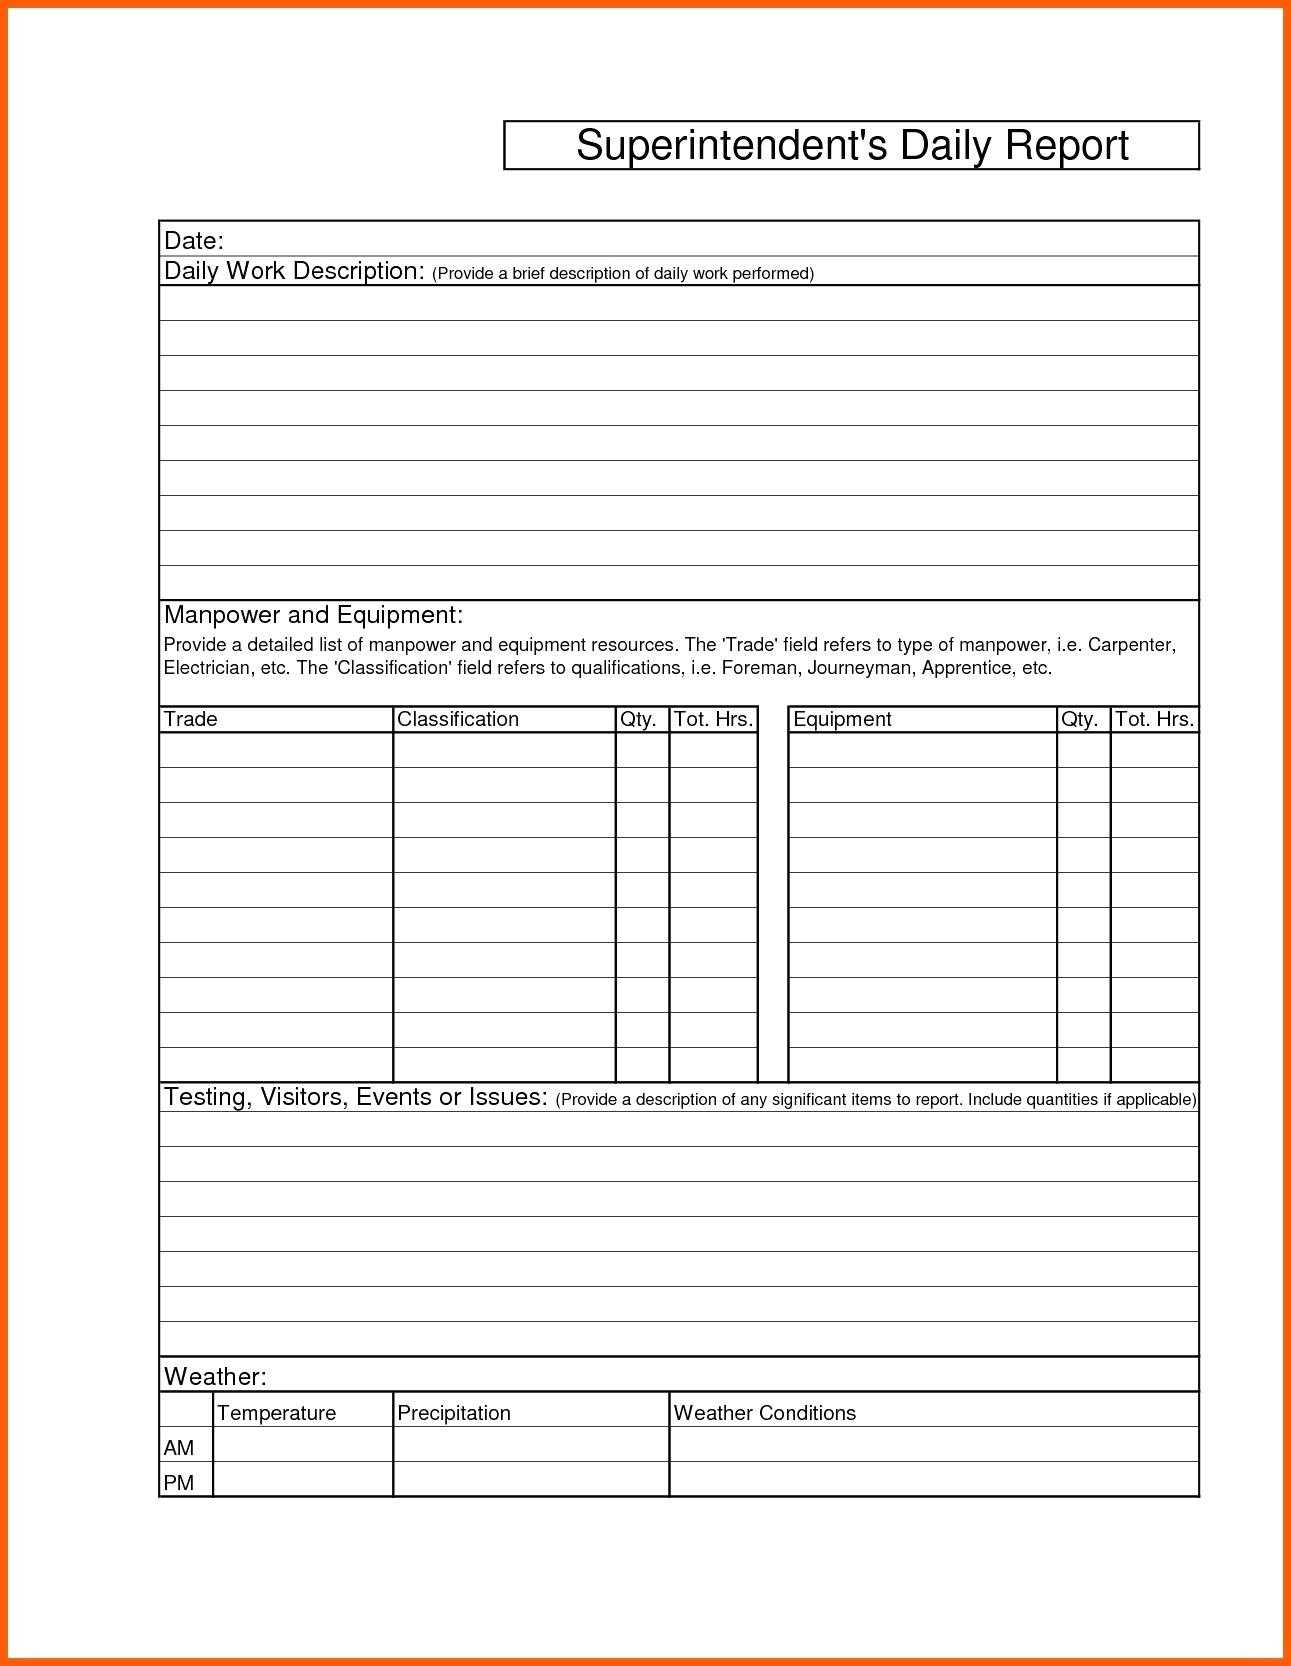 Construction Reports Template – Refat Inside Superintendent Daily Report Template